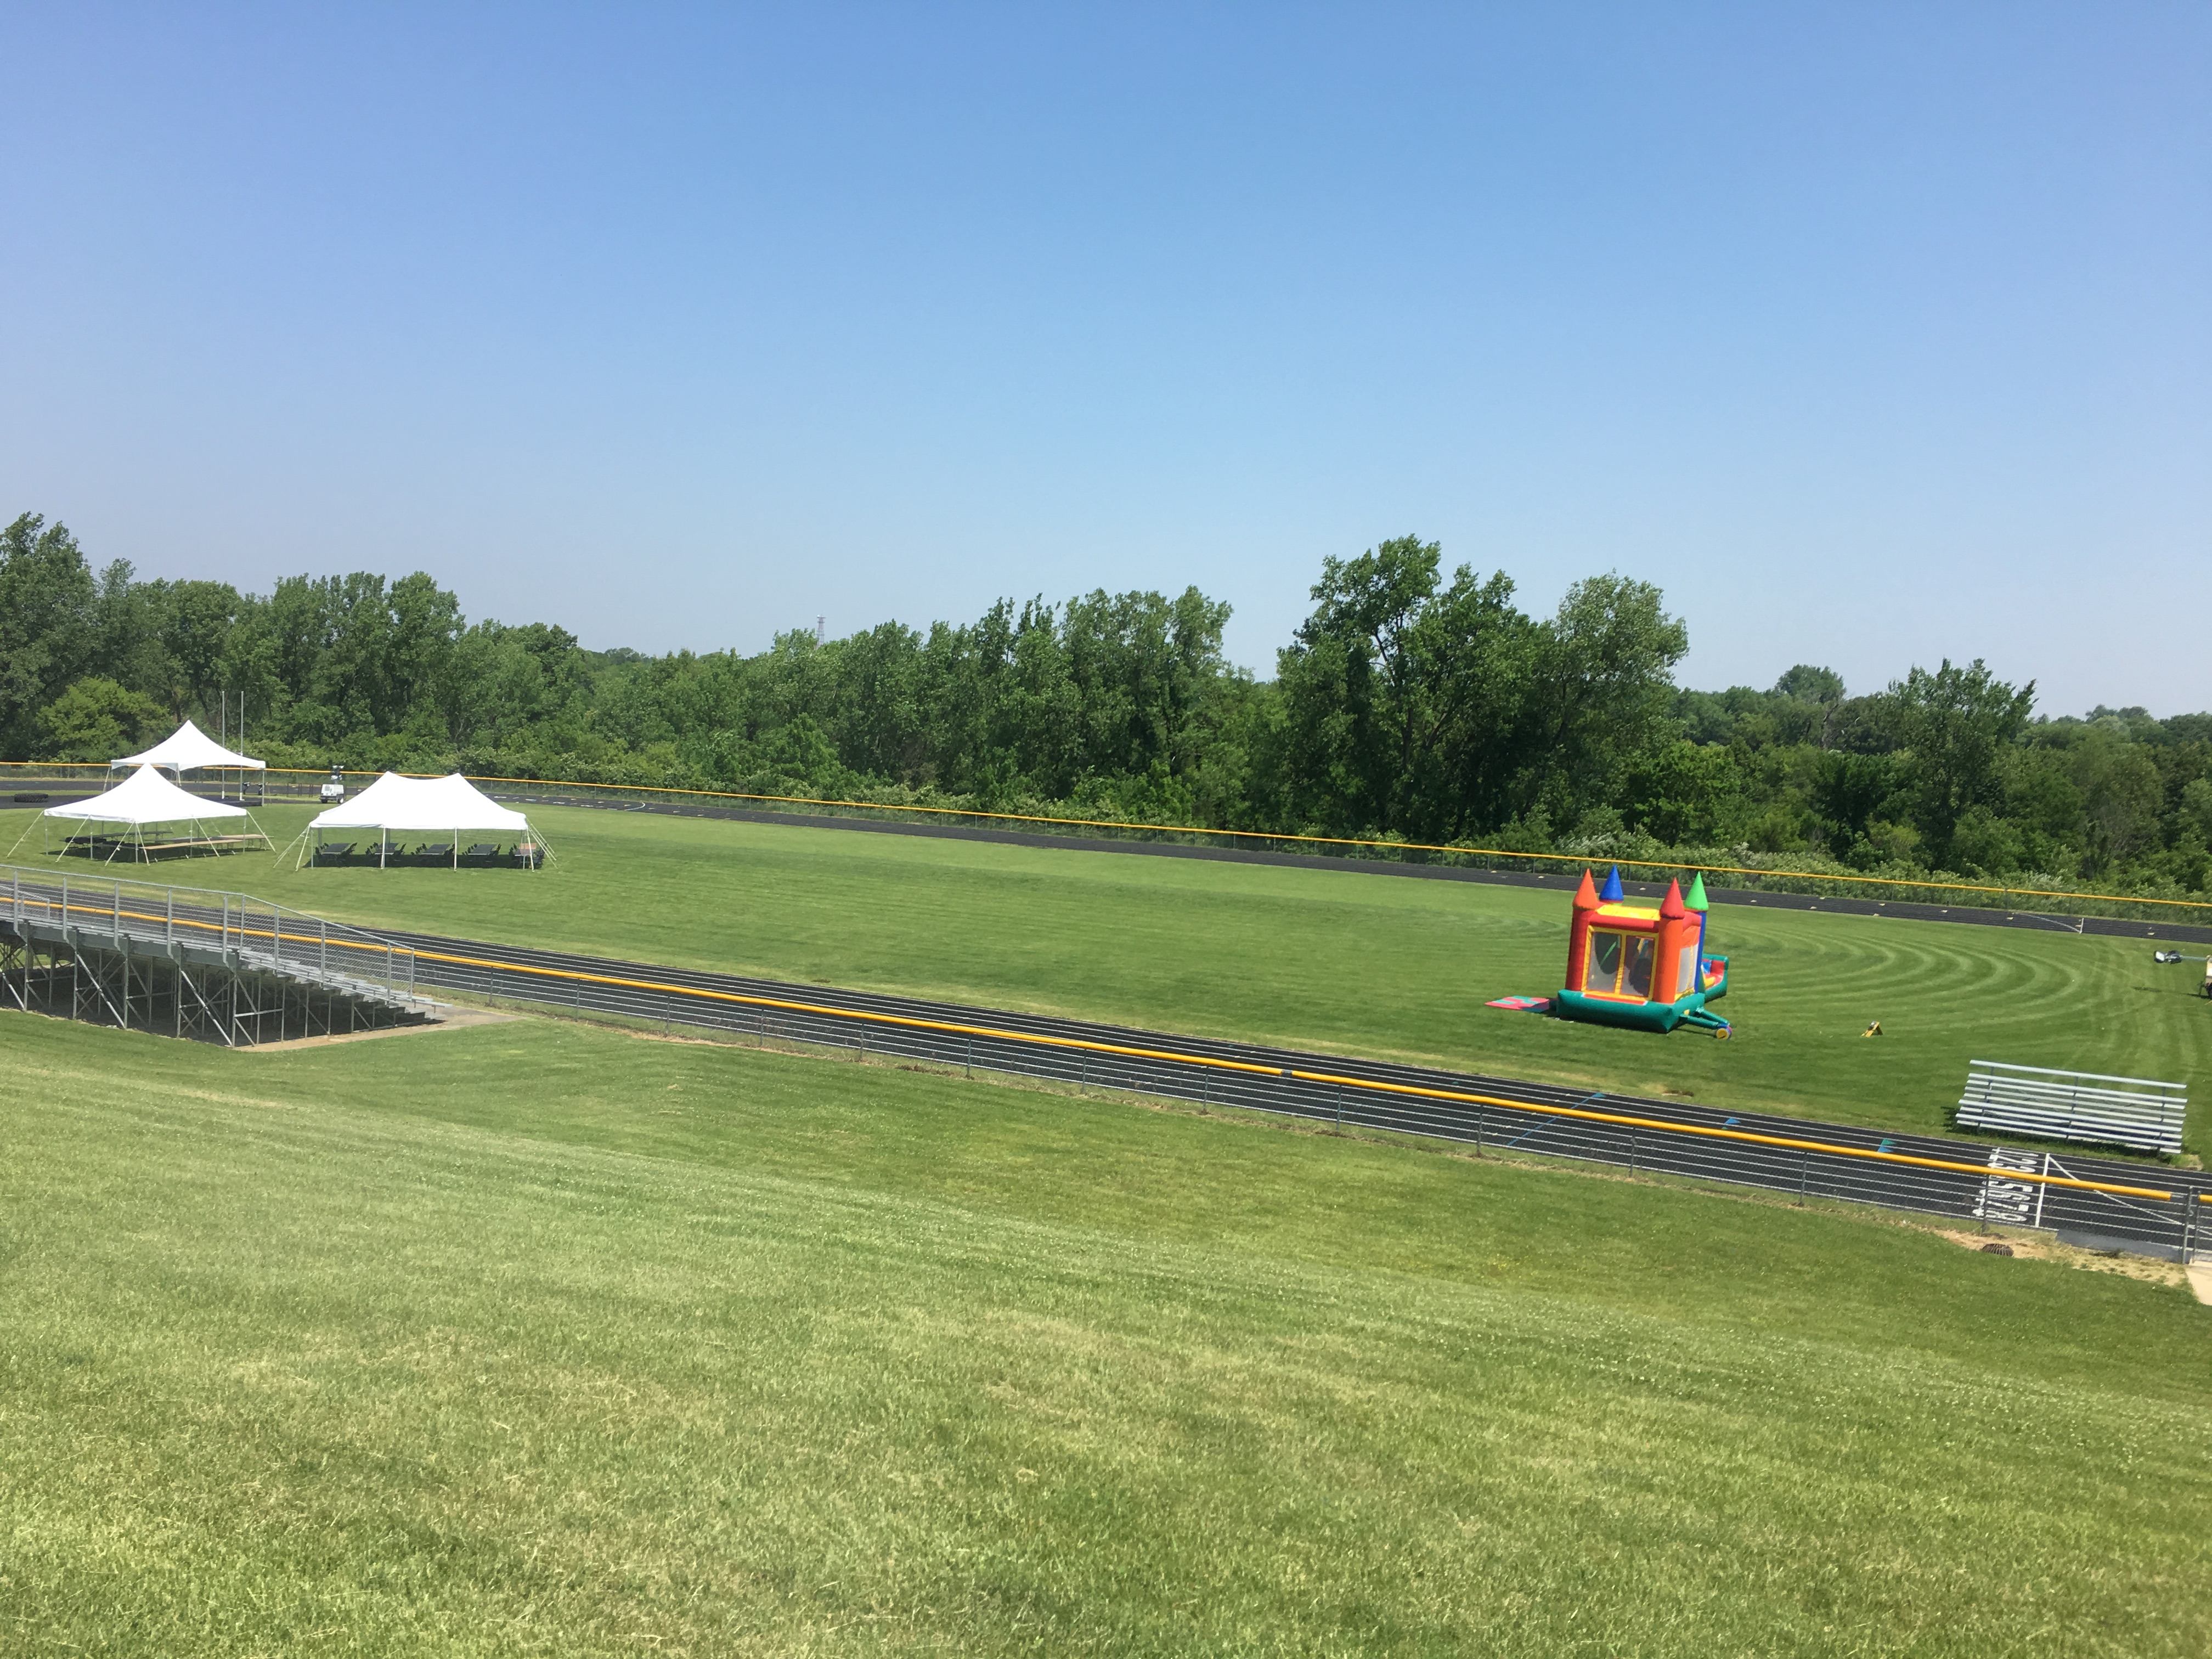 Middle of Relay for Life running track with tents and bounce house